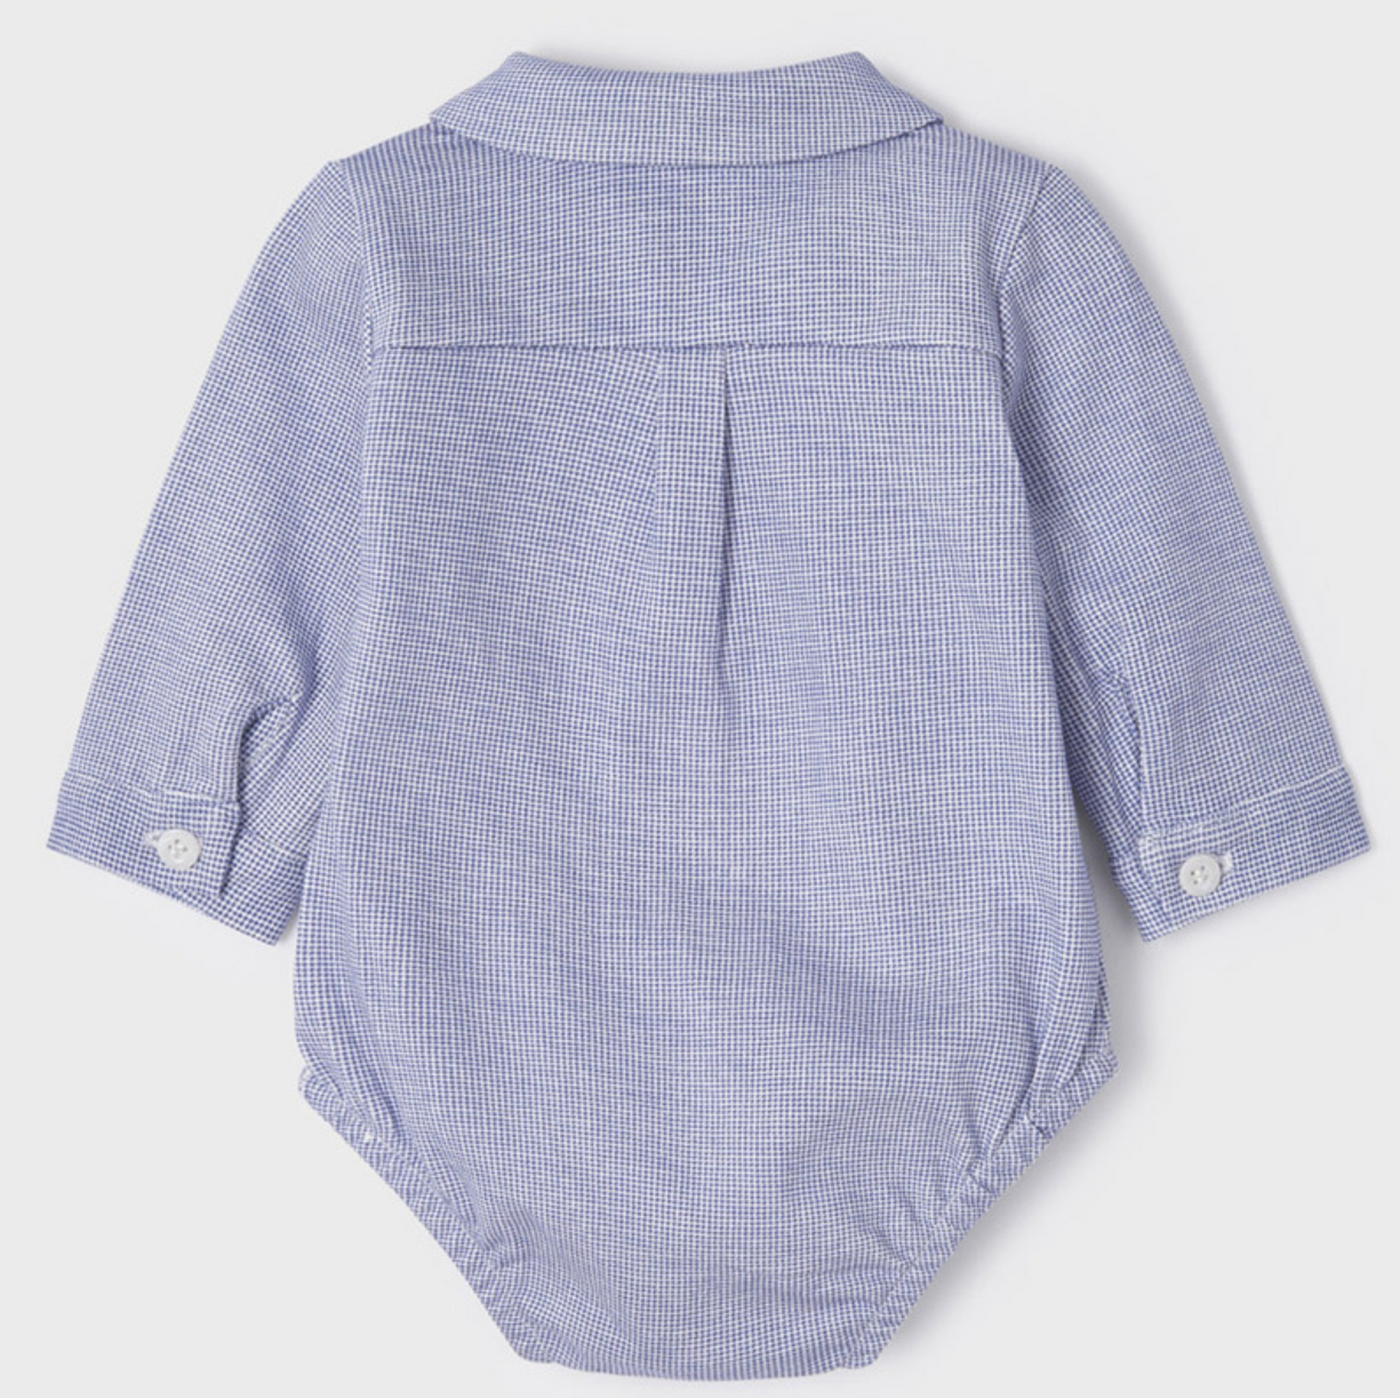 Baby Boy's Long Sleeves Shirt in Light Blue Color